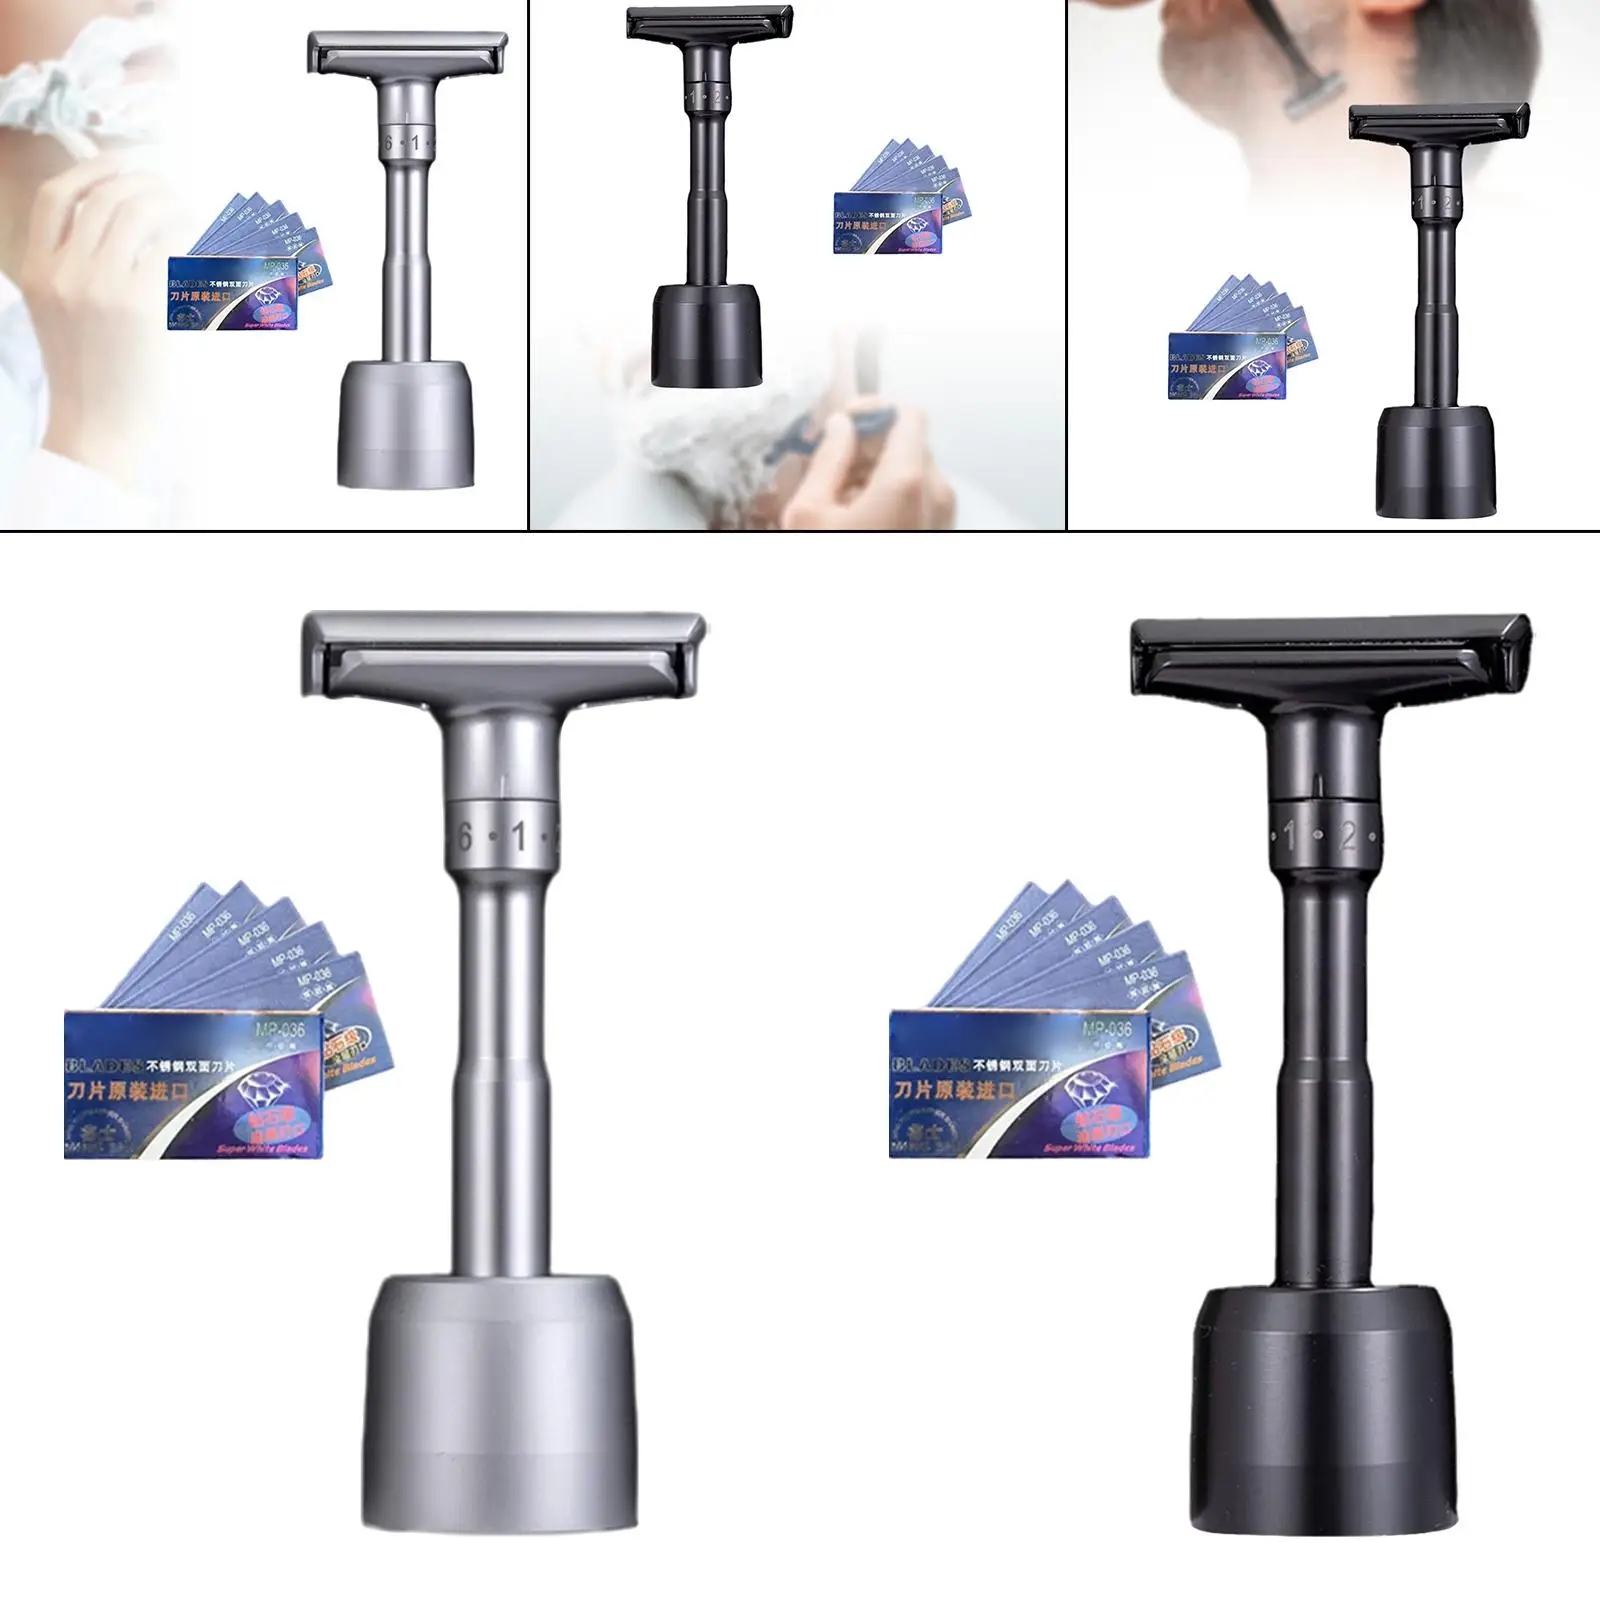 Adjustable Double Edge Safety Razor with Stand Base Portable for Barber Shop